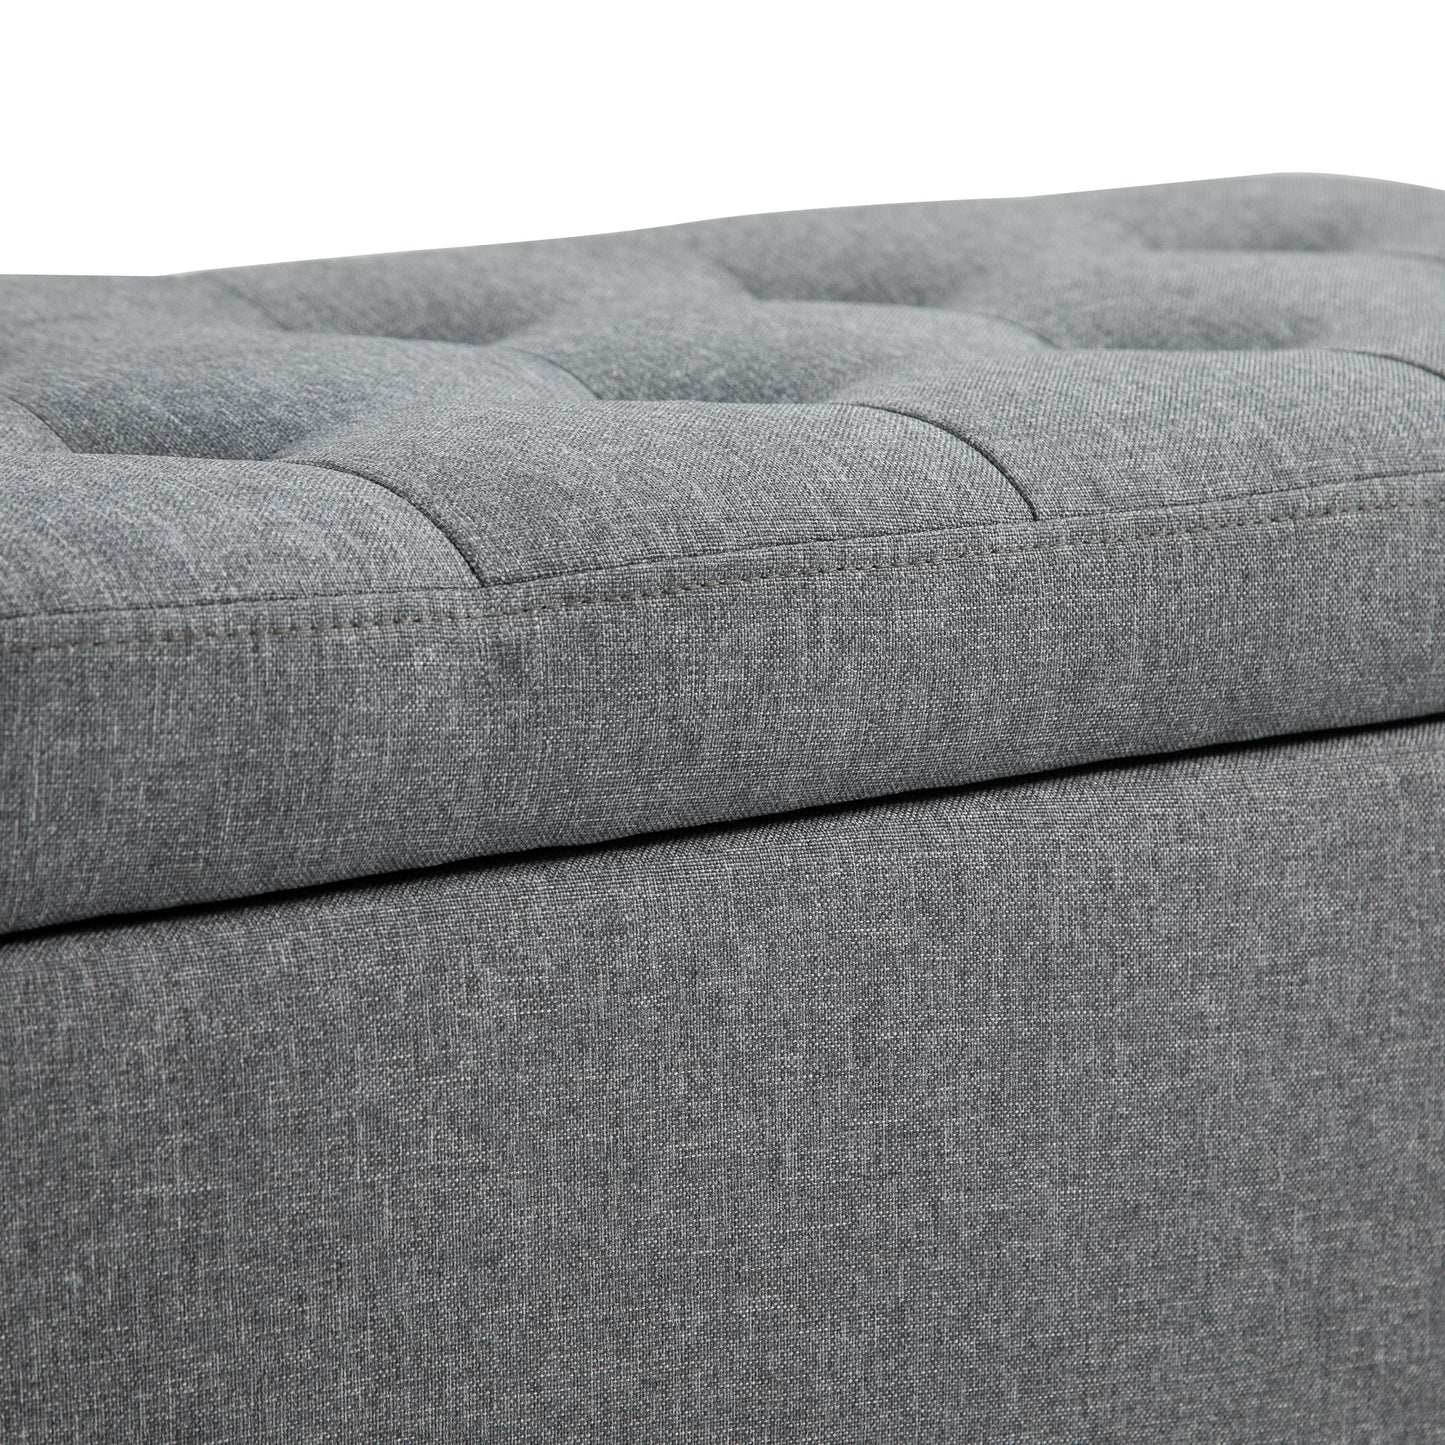 Storage Ottoman Bench, Linen Upholstered Bench with Tufted Design